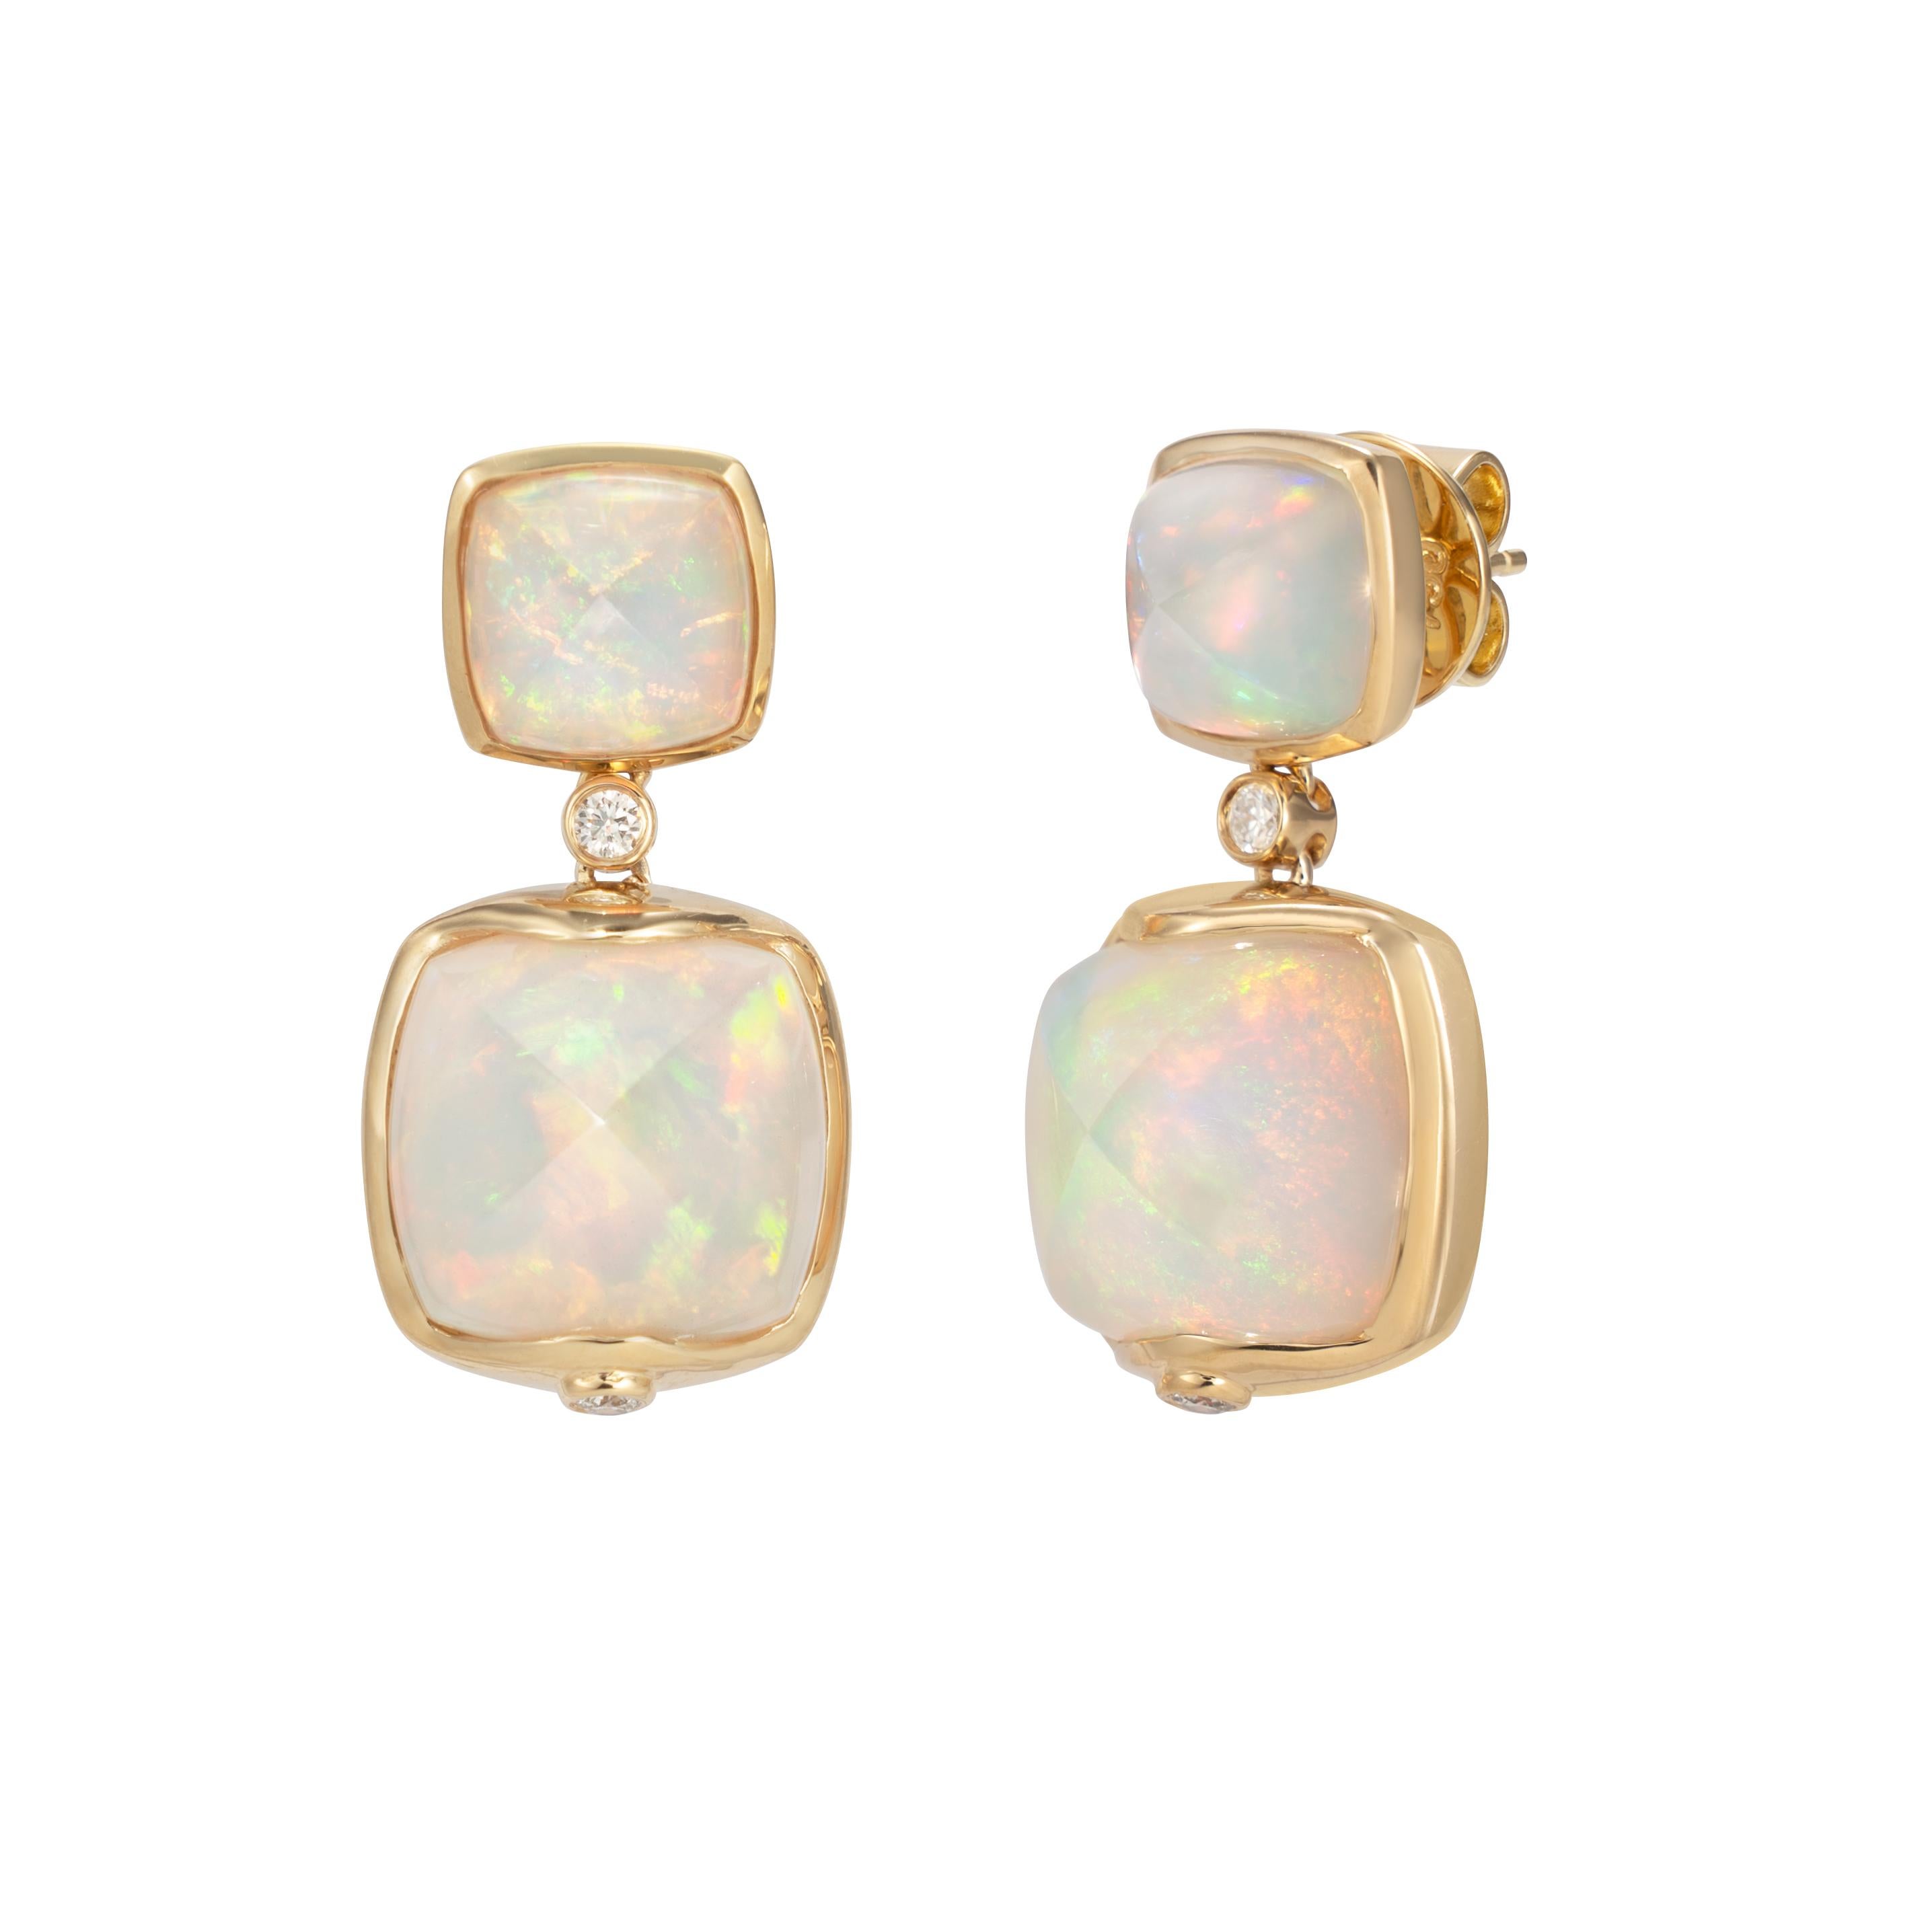 Sweet Sugarloaves! Light and easy to wear these earrings showcase beautiful sugarloaf gemstones accented with a gold frame and diamonds. These earrings are dainty yet have a great pop of color from the vibrant gems.

Ethiopian Opal Sugarloaf